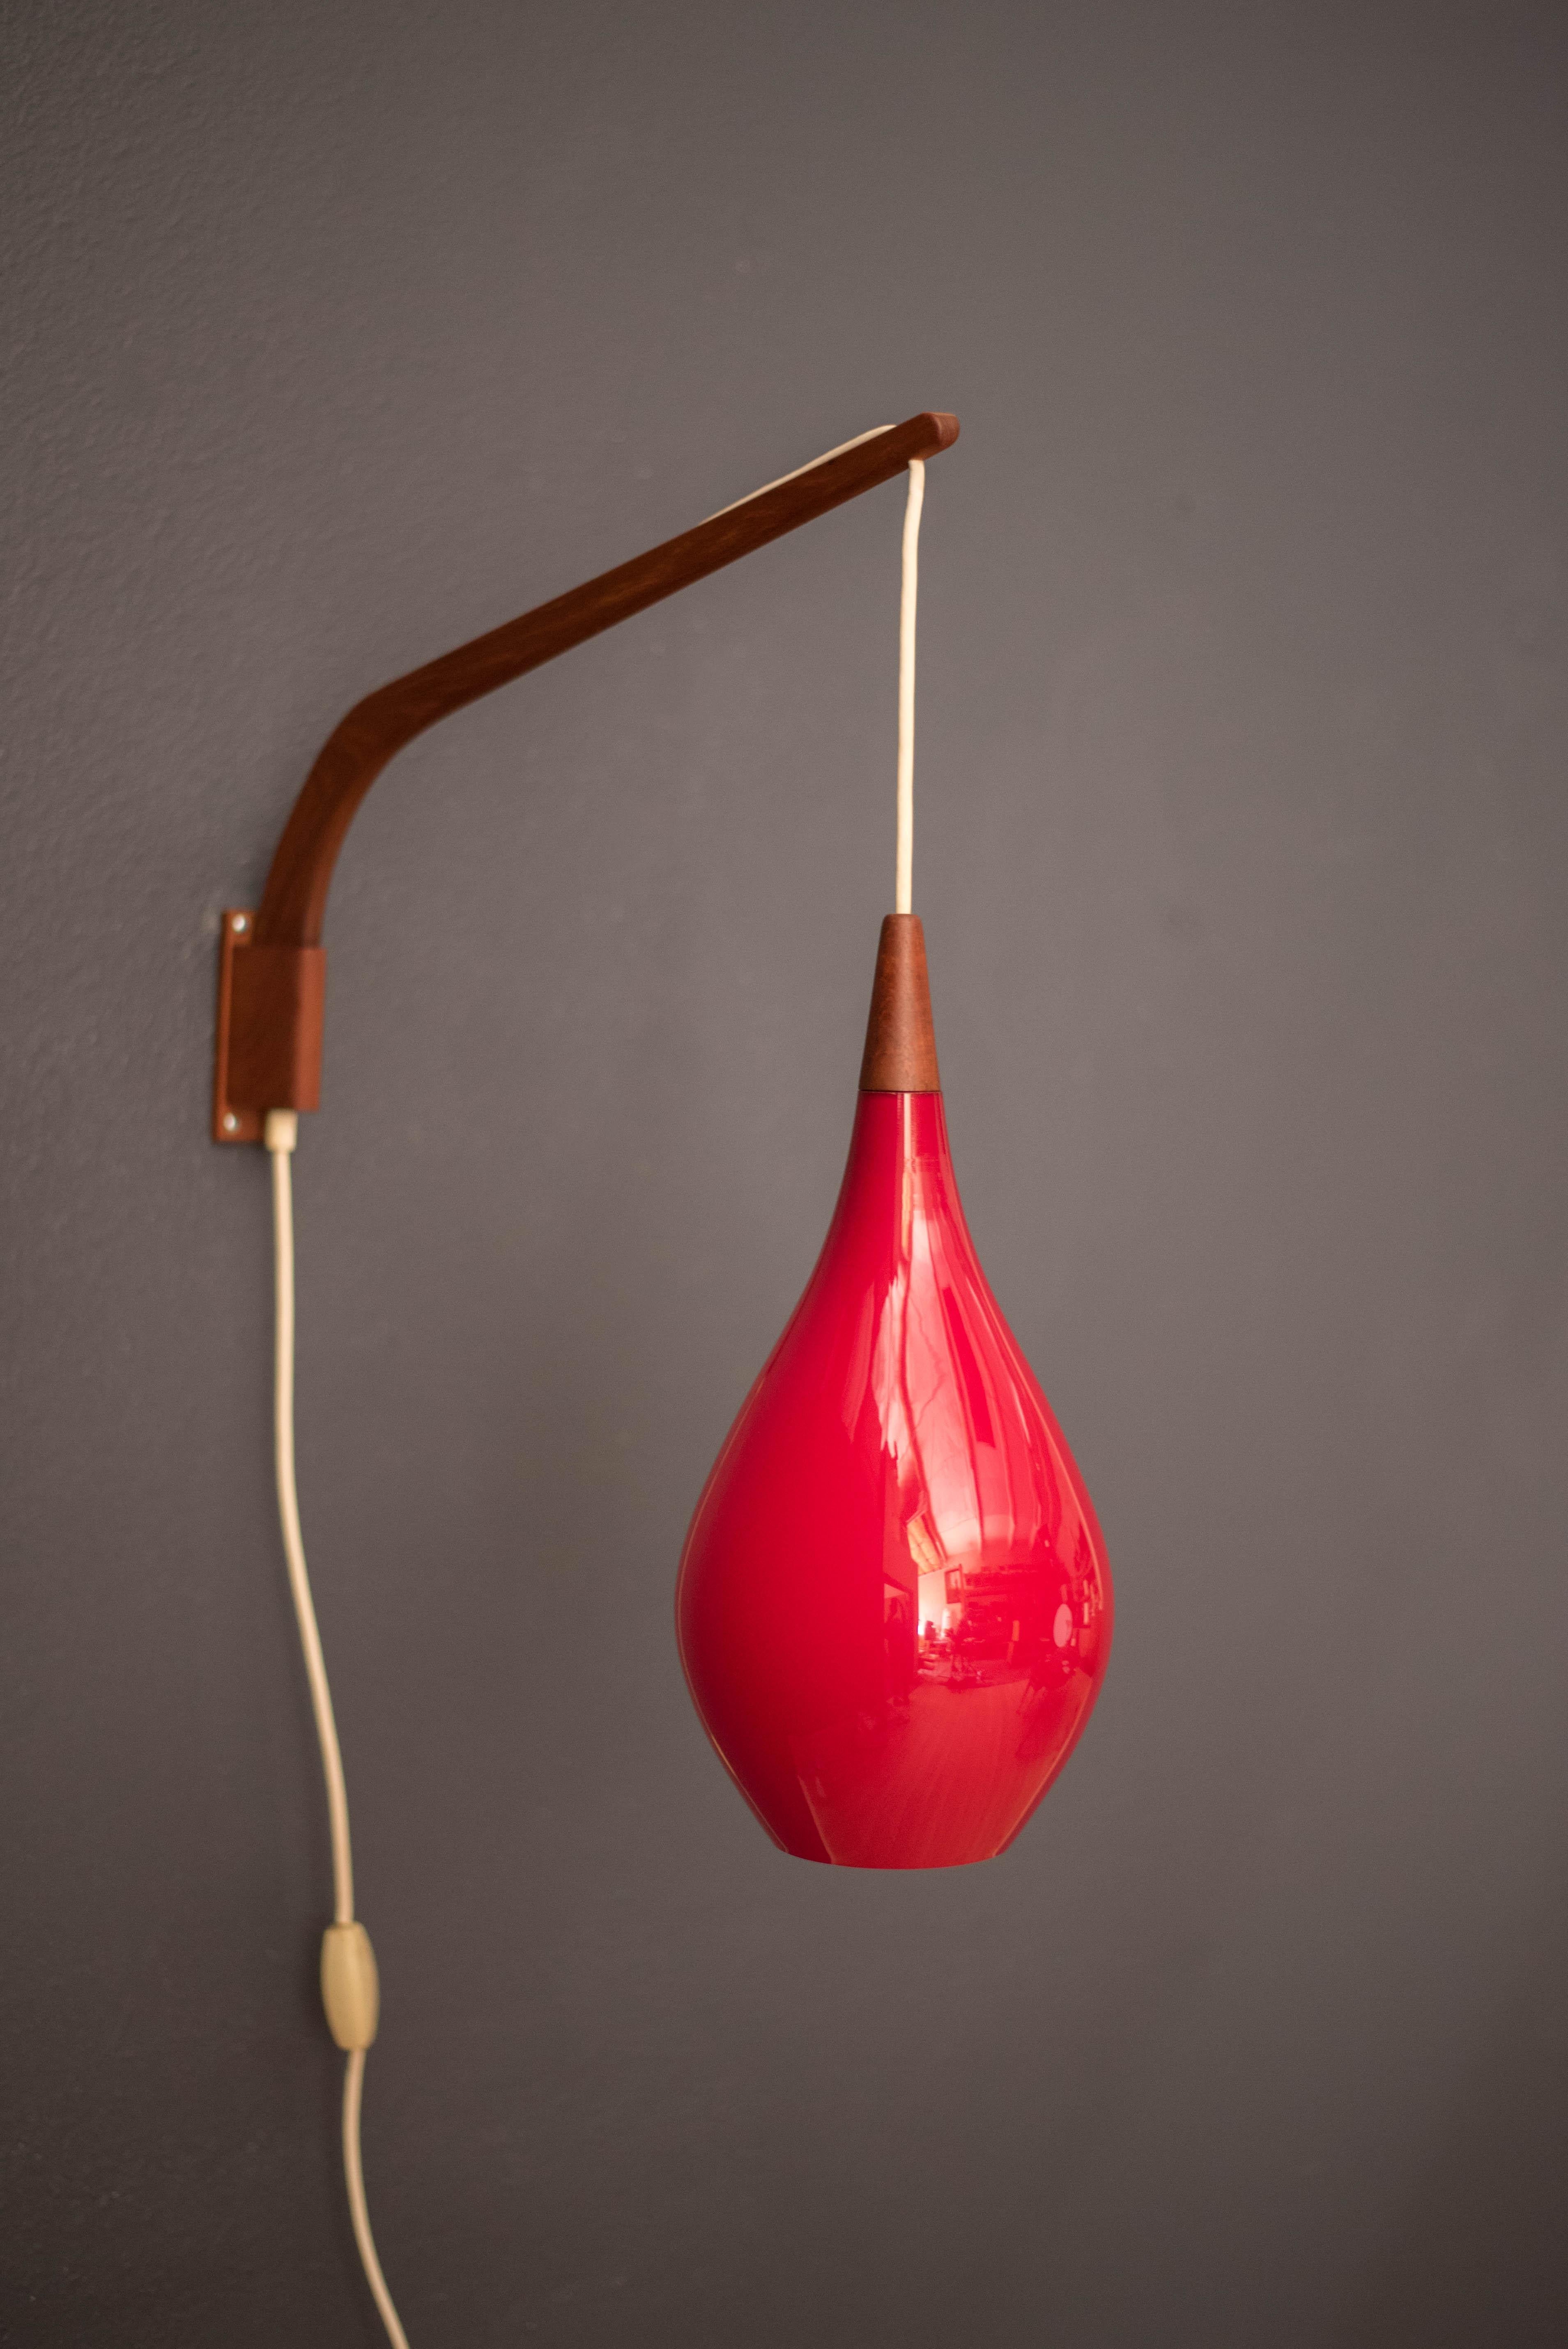 Mid-Century Modern hanging wall light by Holmegaard circa 1960's, Denmark. This piece displays a candy red teardrop glass shade with a frosted white interior. Includes a teak swivel arm with an adjustable cord. 

Swing arm 24